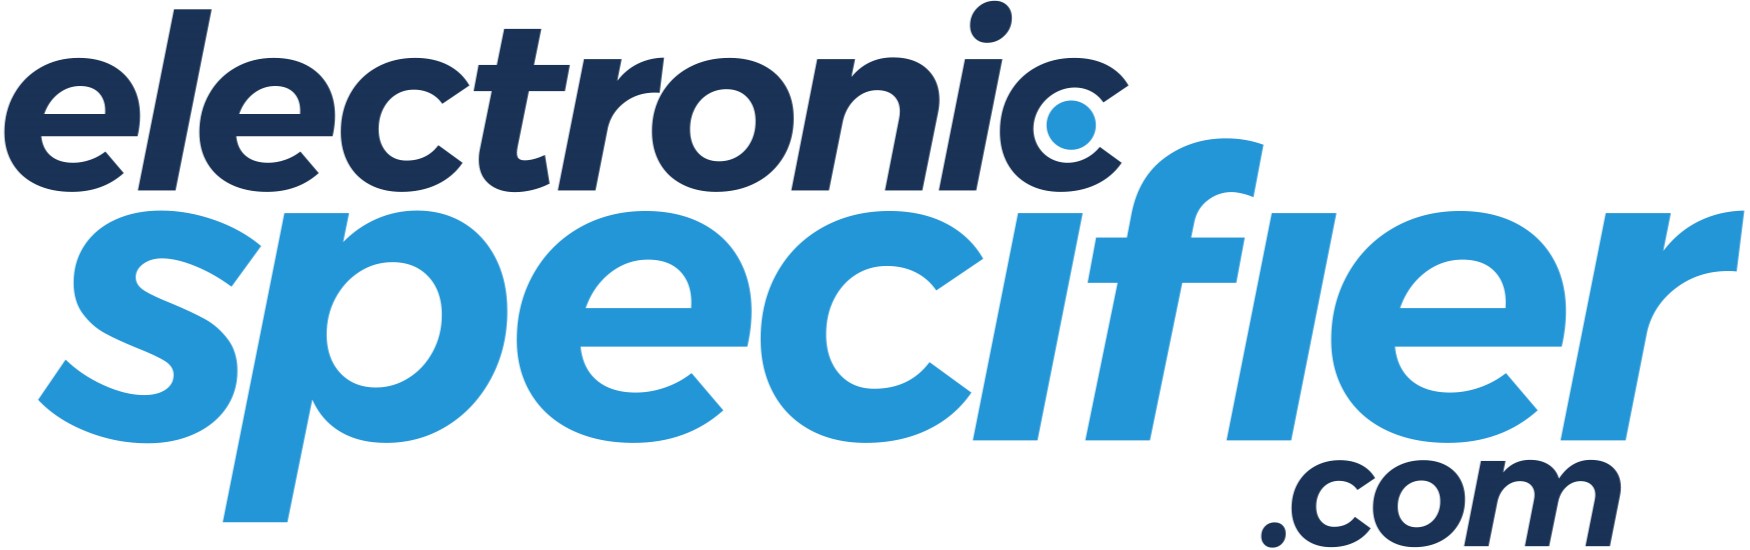 Electronic Specifier